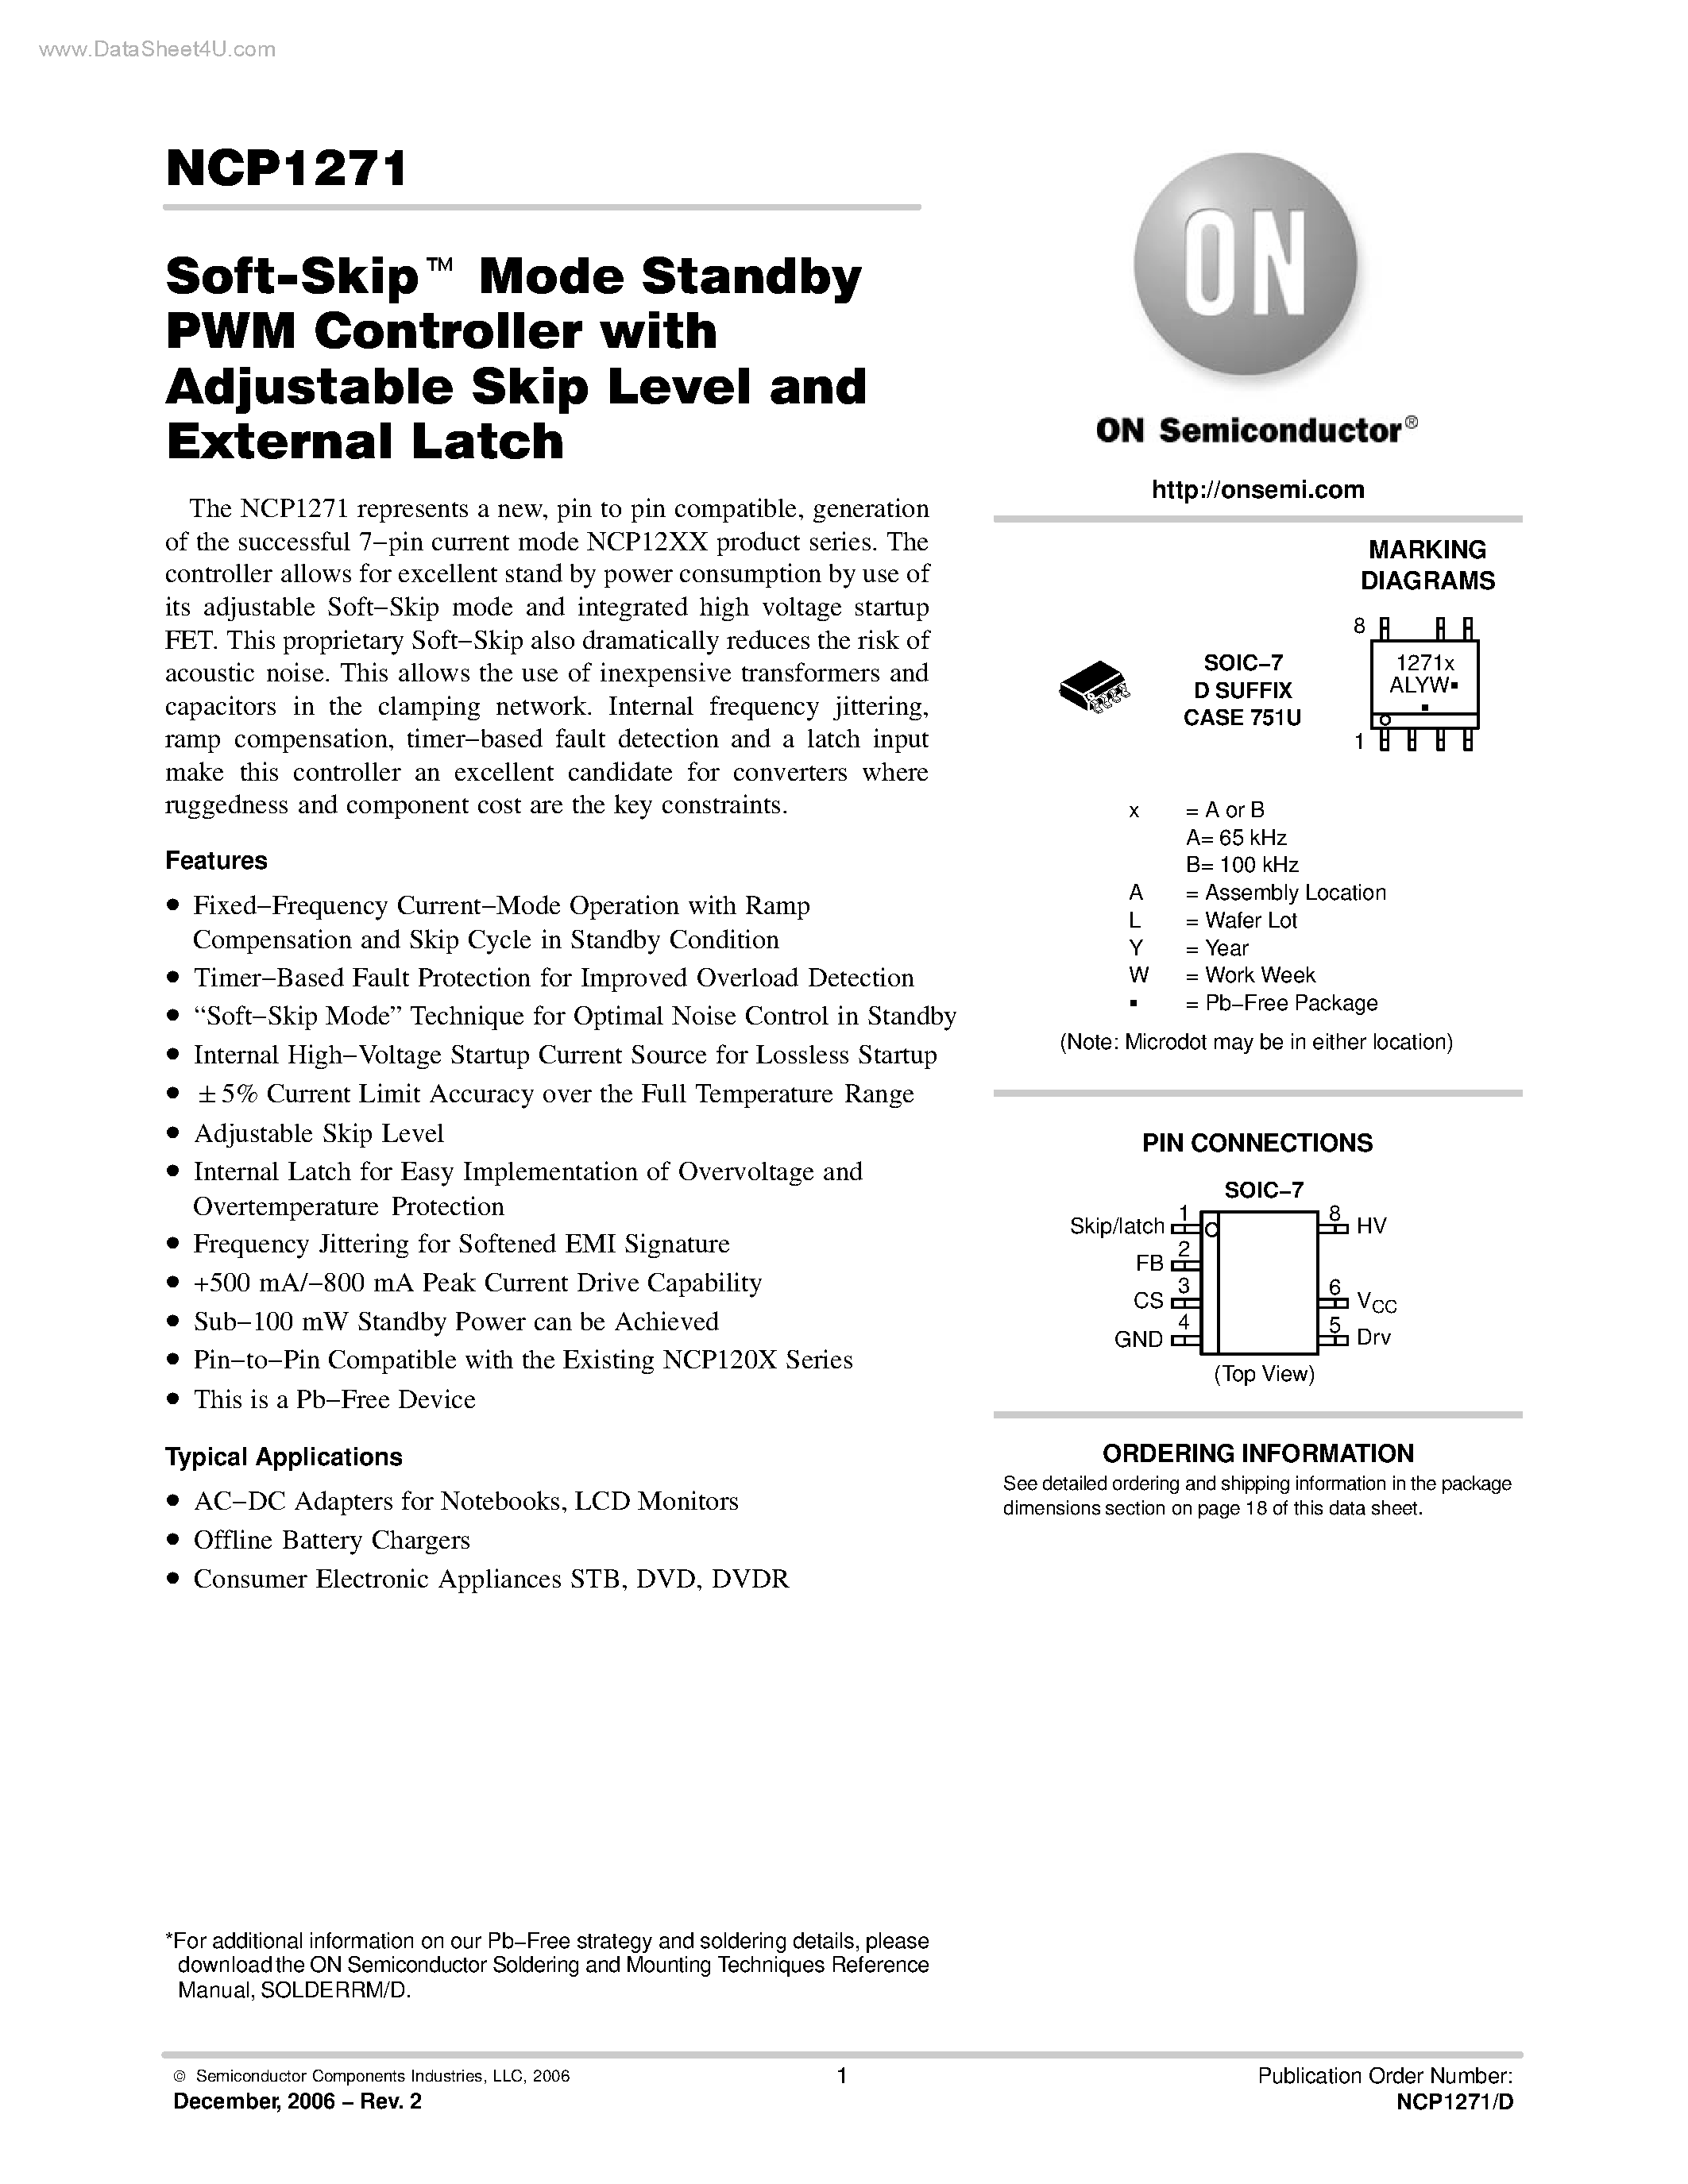 NCP1271 Datasheet ON Semiconductor pdf data sheet FREE from www 